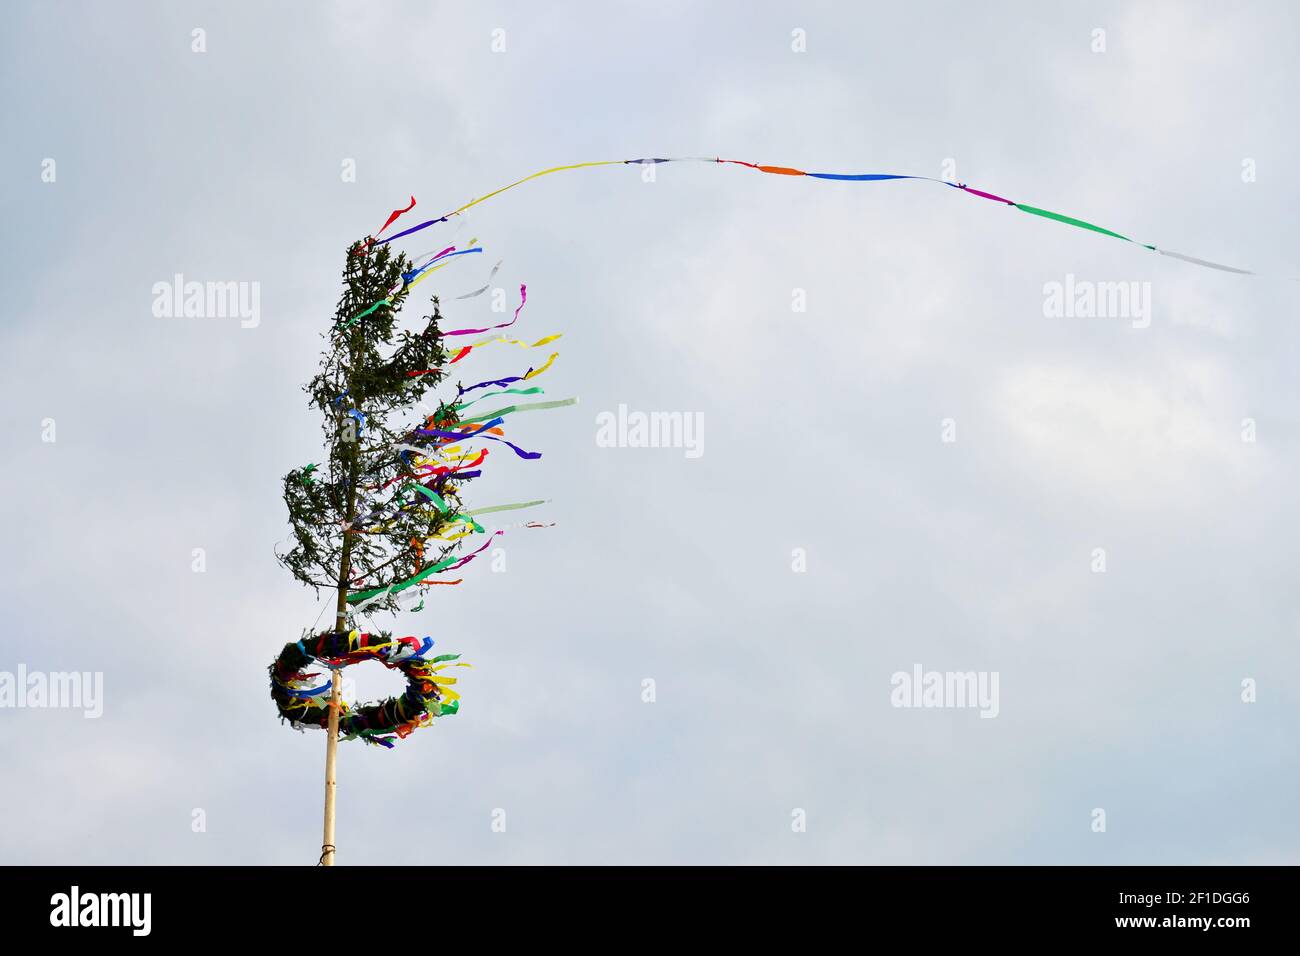 Maypole on a cloudy sky. Traditional European symbol of spring festivities. Tree trunk decorated with colorful ribbons. Stock Photo